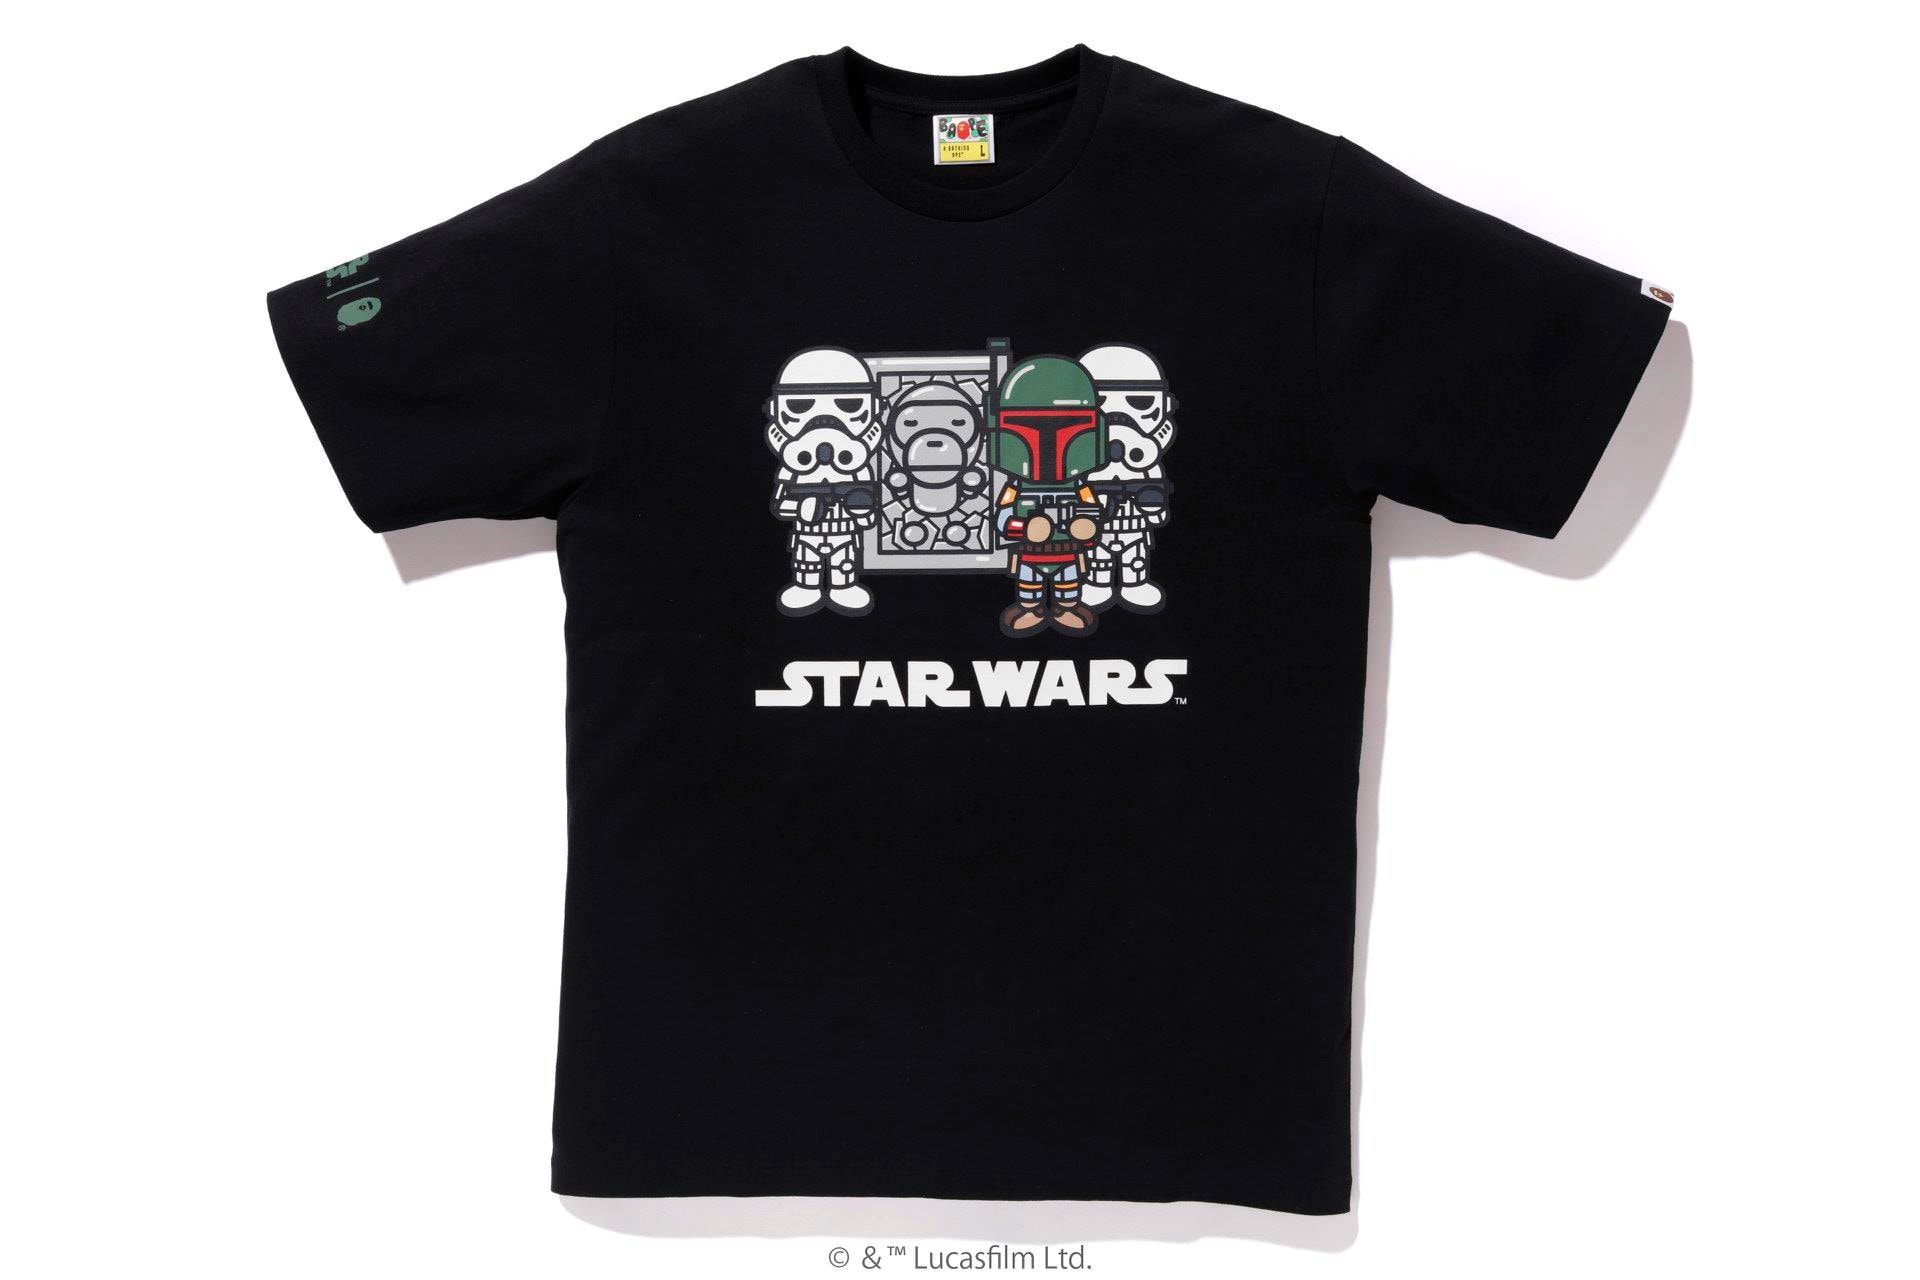 BAPE Teases New Star Wars The Mandalorian Collaborative Capsule baby milo the rise of skywalker collaborations lucasfilms 